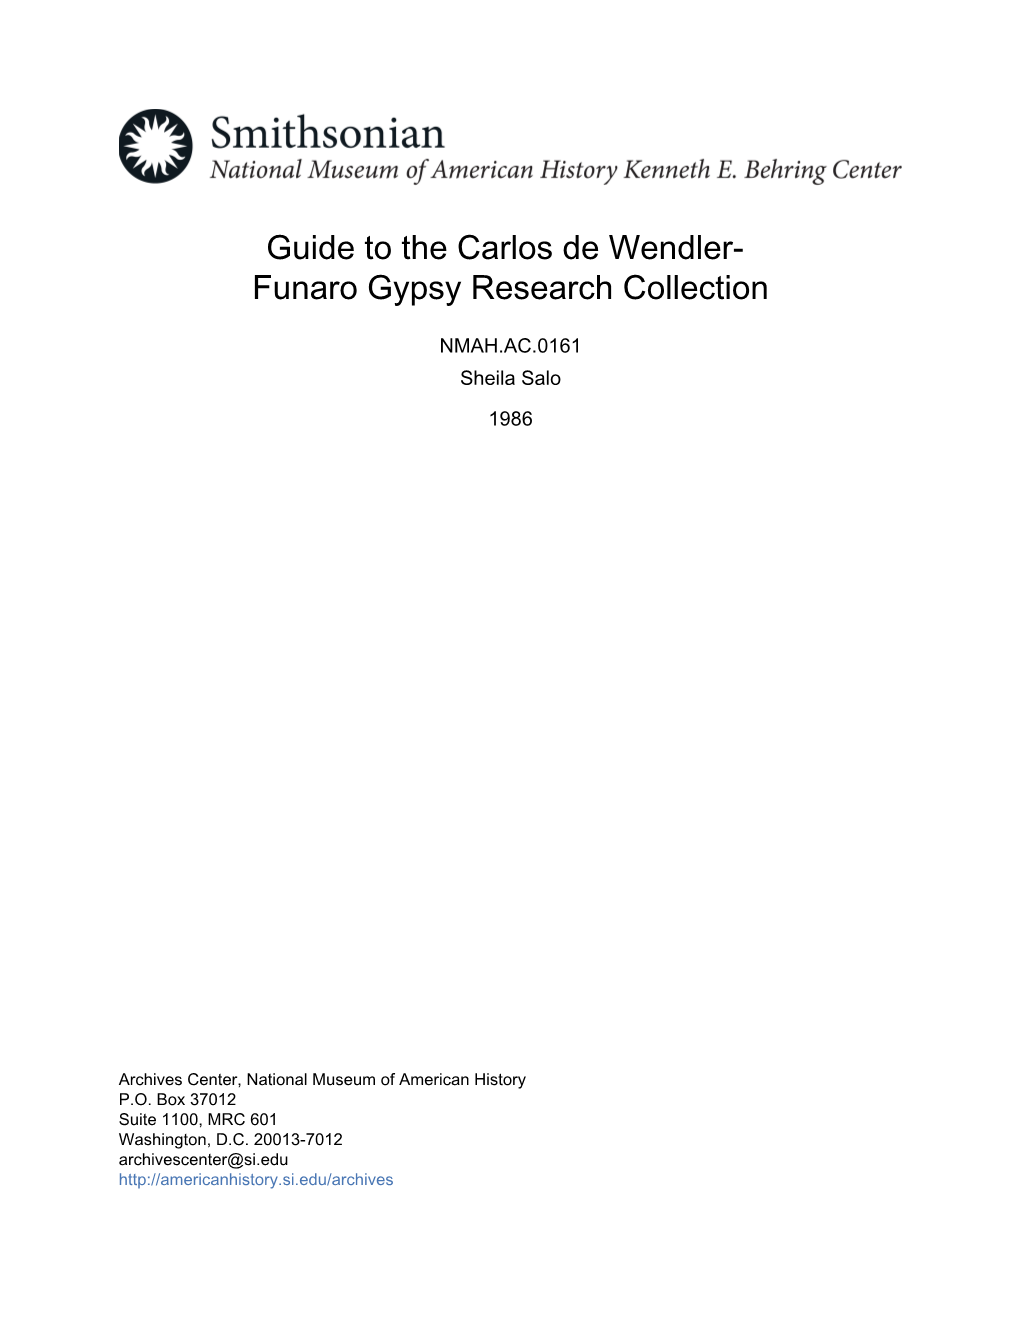 Guide to the Carlos De Wendler- Funaro Gypsy Research Collection